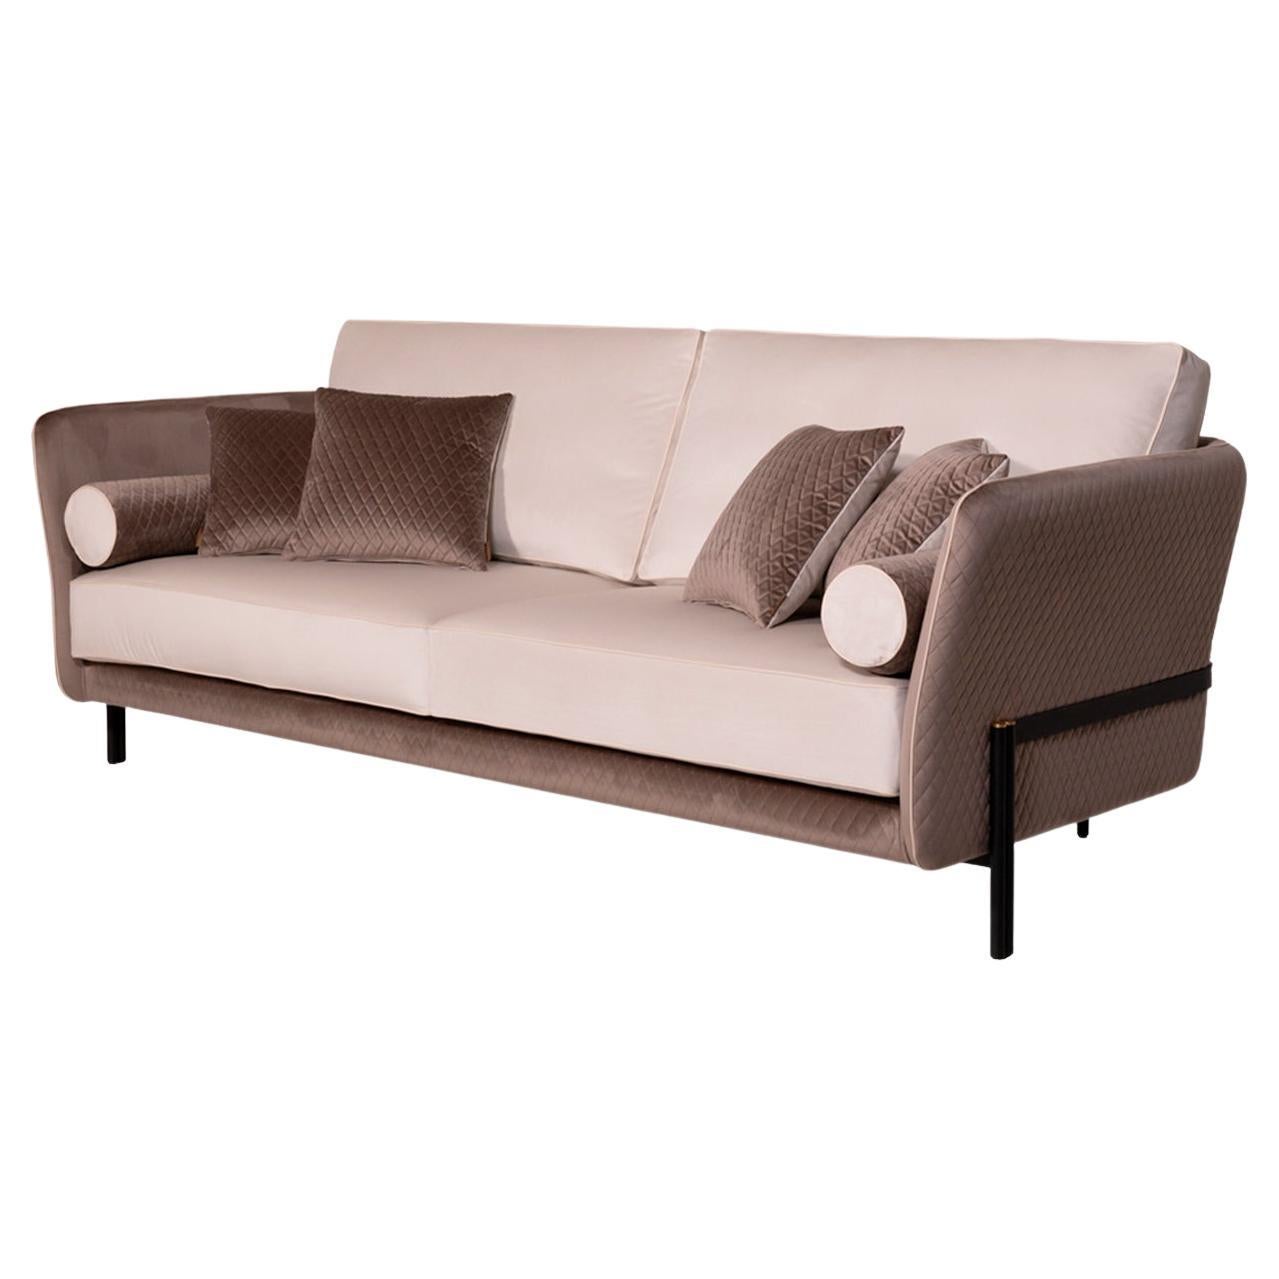 The Universal sofa is one of the new and elegant products designed by the Mantellassi family. The base is made up of two legs in solid satin brass that lift and follow the curved line of the upholstered shell, on which the seats and backrests. The